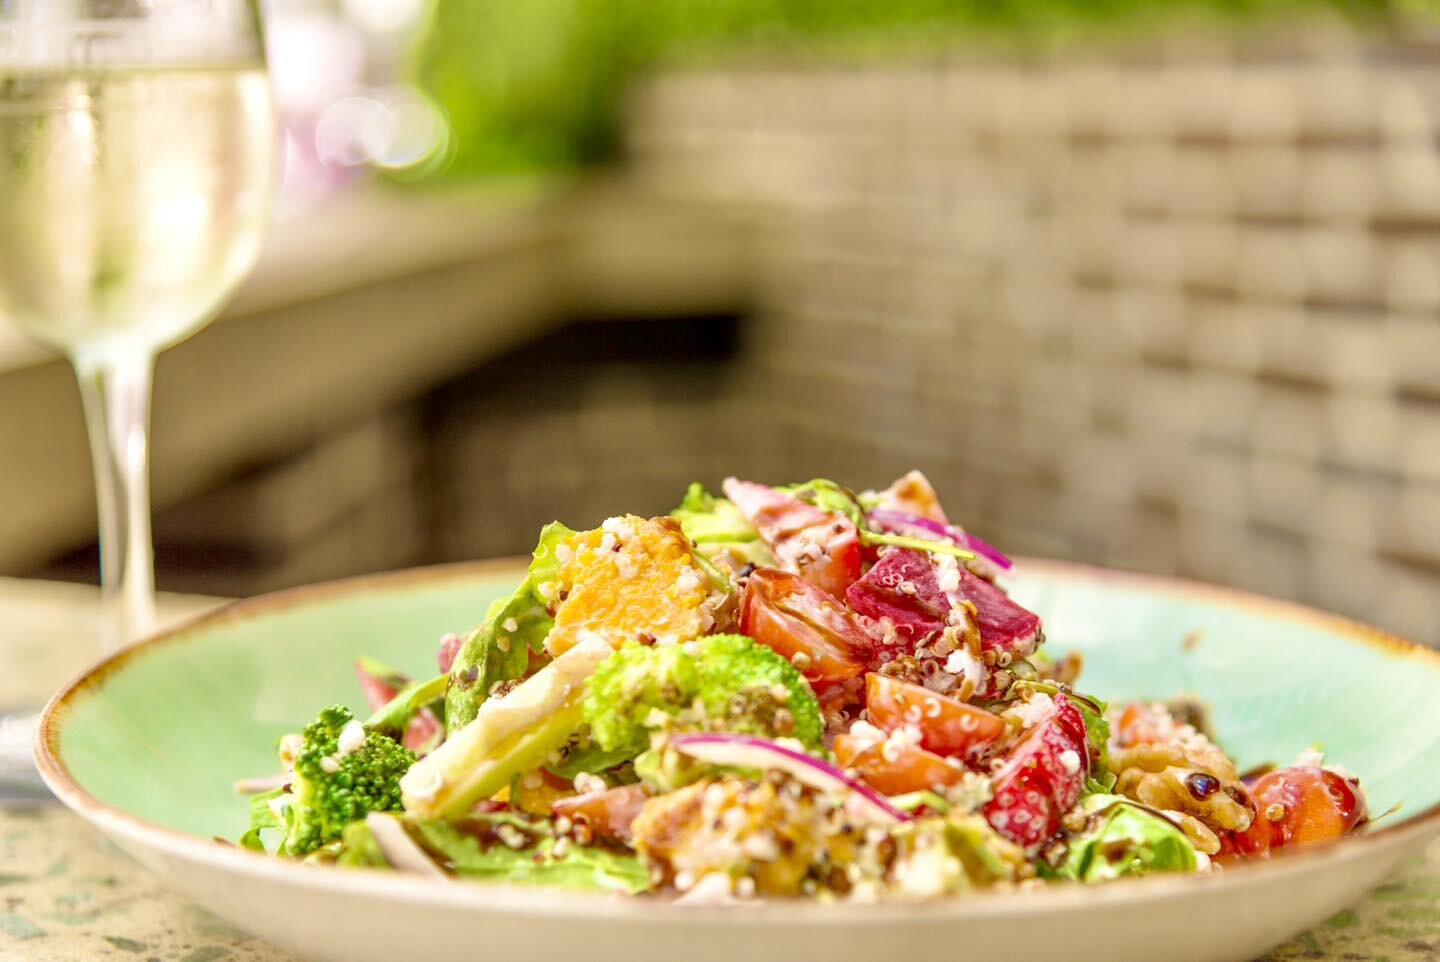 Looking for healthy and delicious meal options? Look no further! Our menu is packed with plenty of nutritious choices, including the crowd-pleasing Viking Salad! 🥗🌈

This colorful and flavorful salad is sure to satisfy your cravings and nourish you